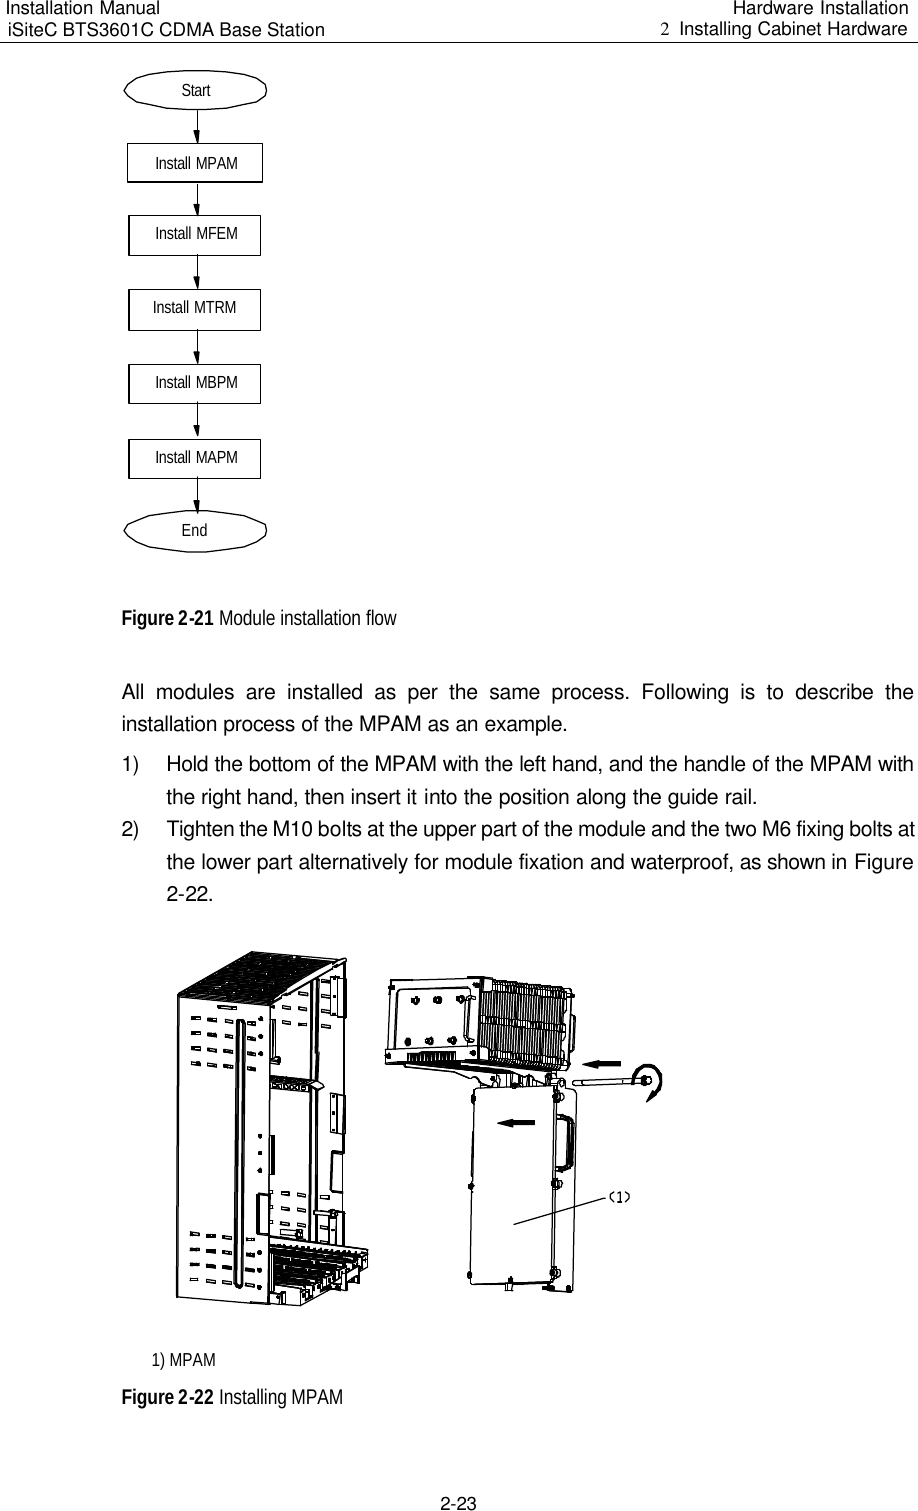 Installation Manual   iSiteC BTS3601C CDMA Base Station Hardware Installation 2  Installing Cabinet Hardware  2-23 StartInstall MFEMInstall MTRMInstall MPAMEndInstall MBPMInstall MAPM Figure 2-21 Module installation flow All modules are installed as per the same process. Following is to describe the installation process of the MPAM as an example. 1) Hold the bottom of the MPAM with the left hand, and the handle of the MPAM with the right hand, then insert it into the position along the guide rail.  2) Tighten the M10 bolts at the upper part of the module and the two M6 fixing bolts at the lower part alternatively for module fixation and waterproof, as shown in Figure 2-22.  1) MPAM  Figure 2-22 Installing MPAM  